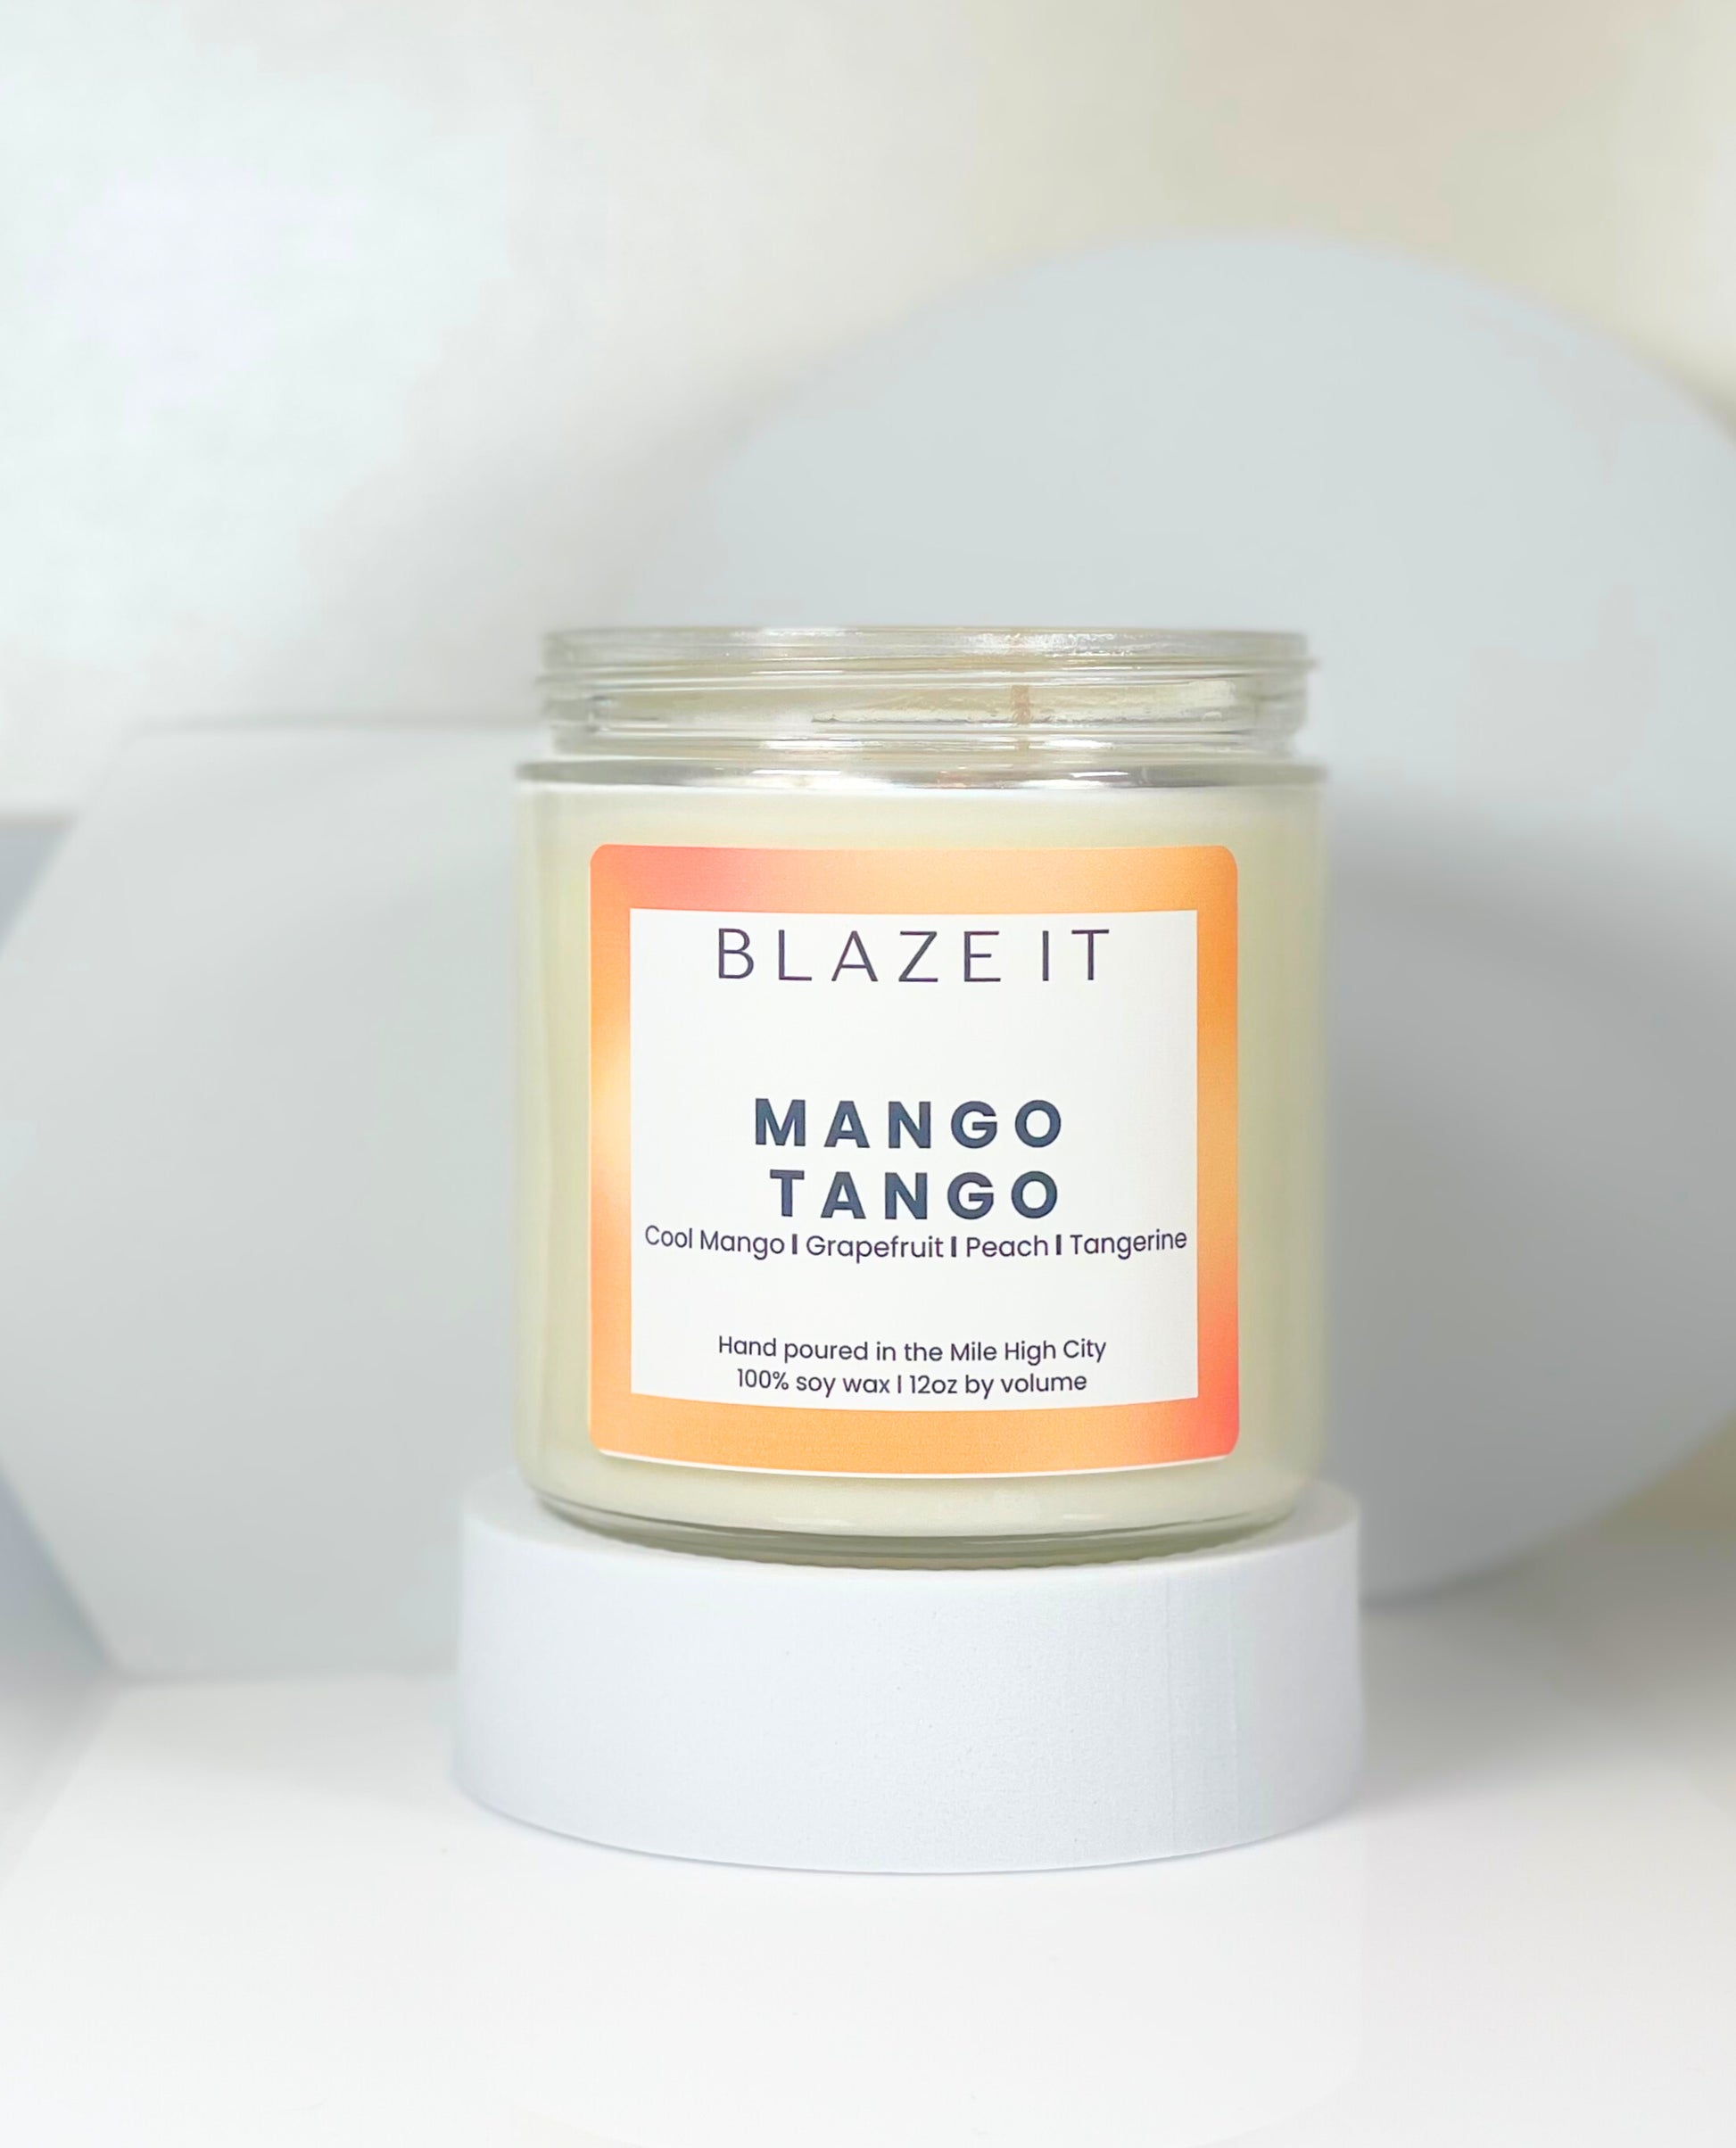 Mango Tango candle with notes of Cool Mango, Grapefruit, Peach and Tangerine l Blaze It Candle Co